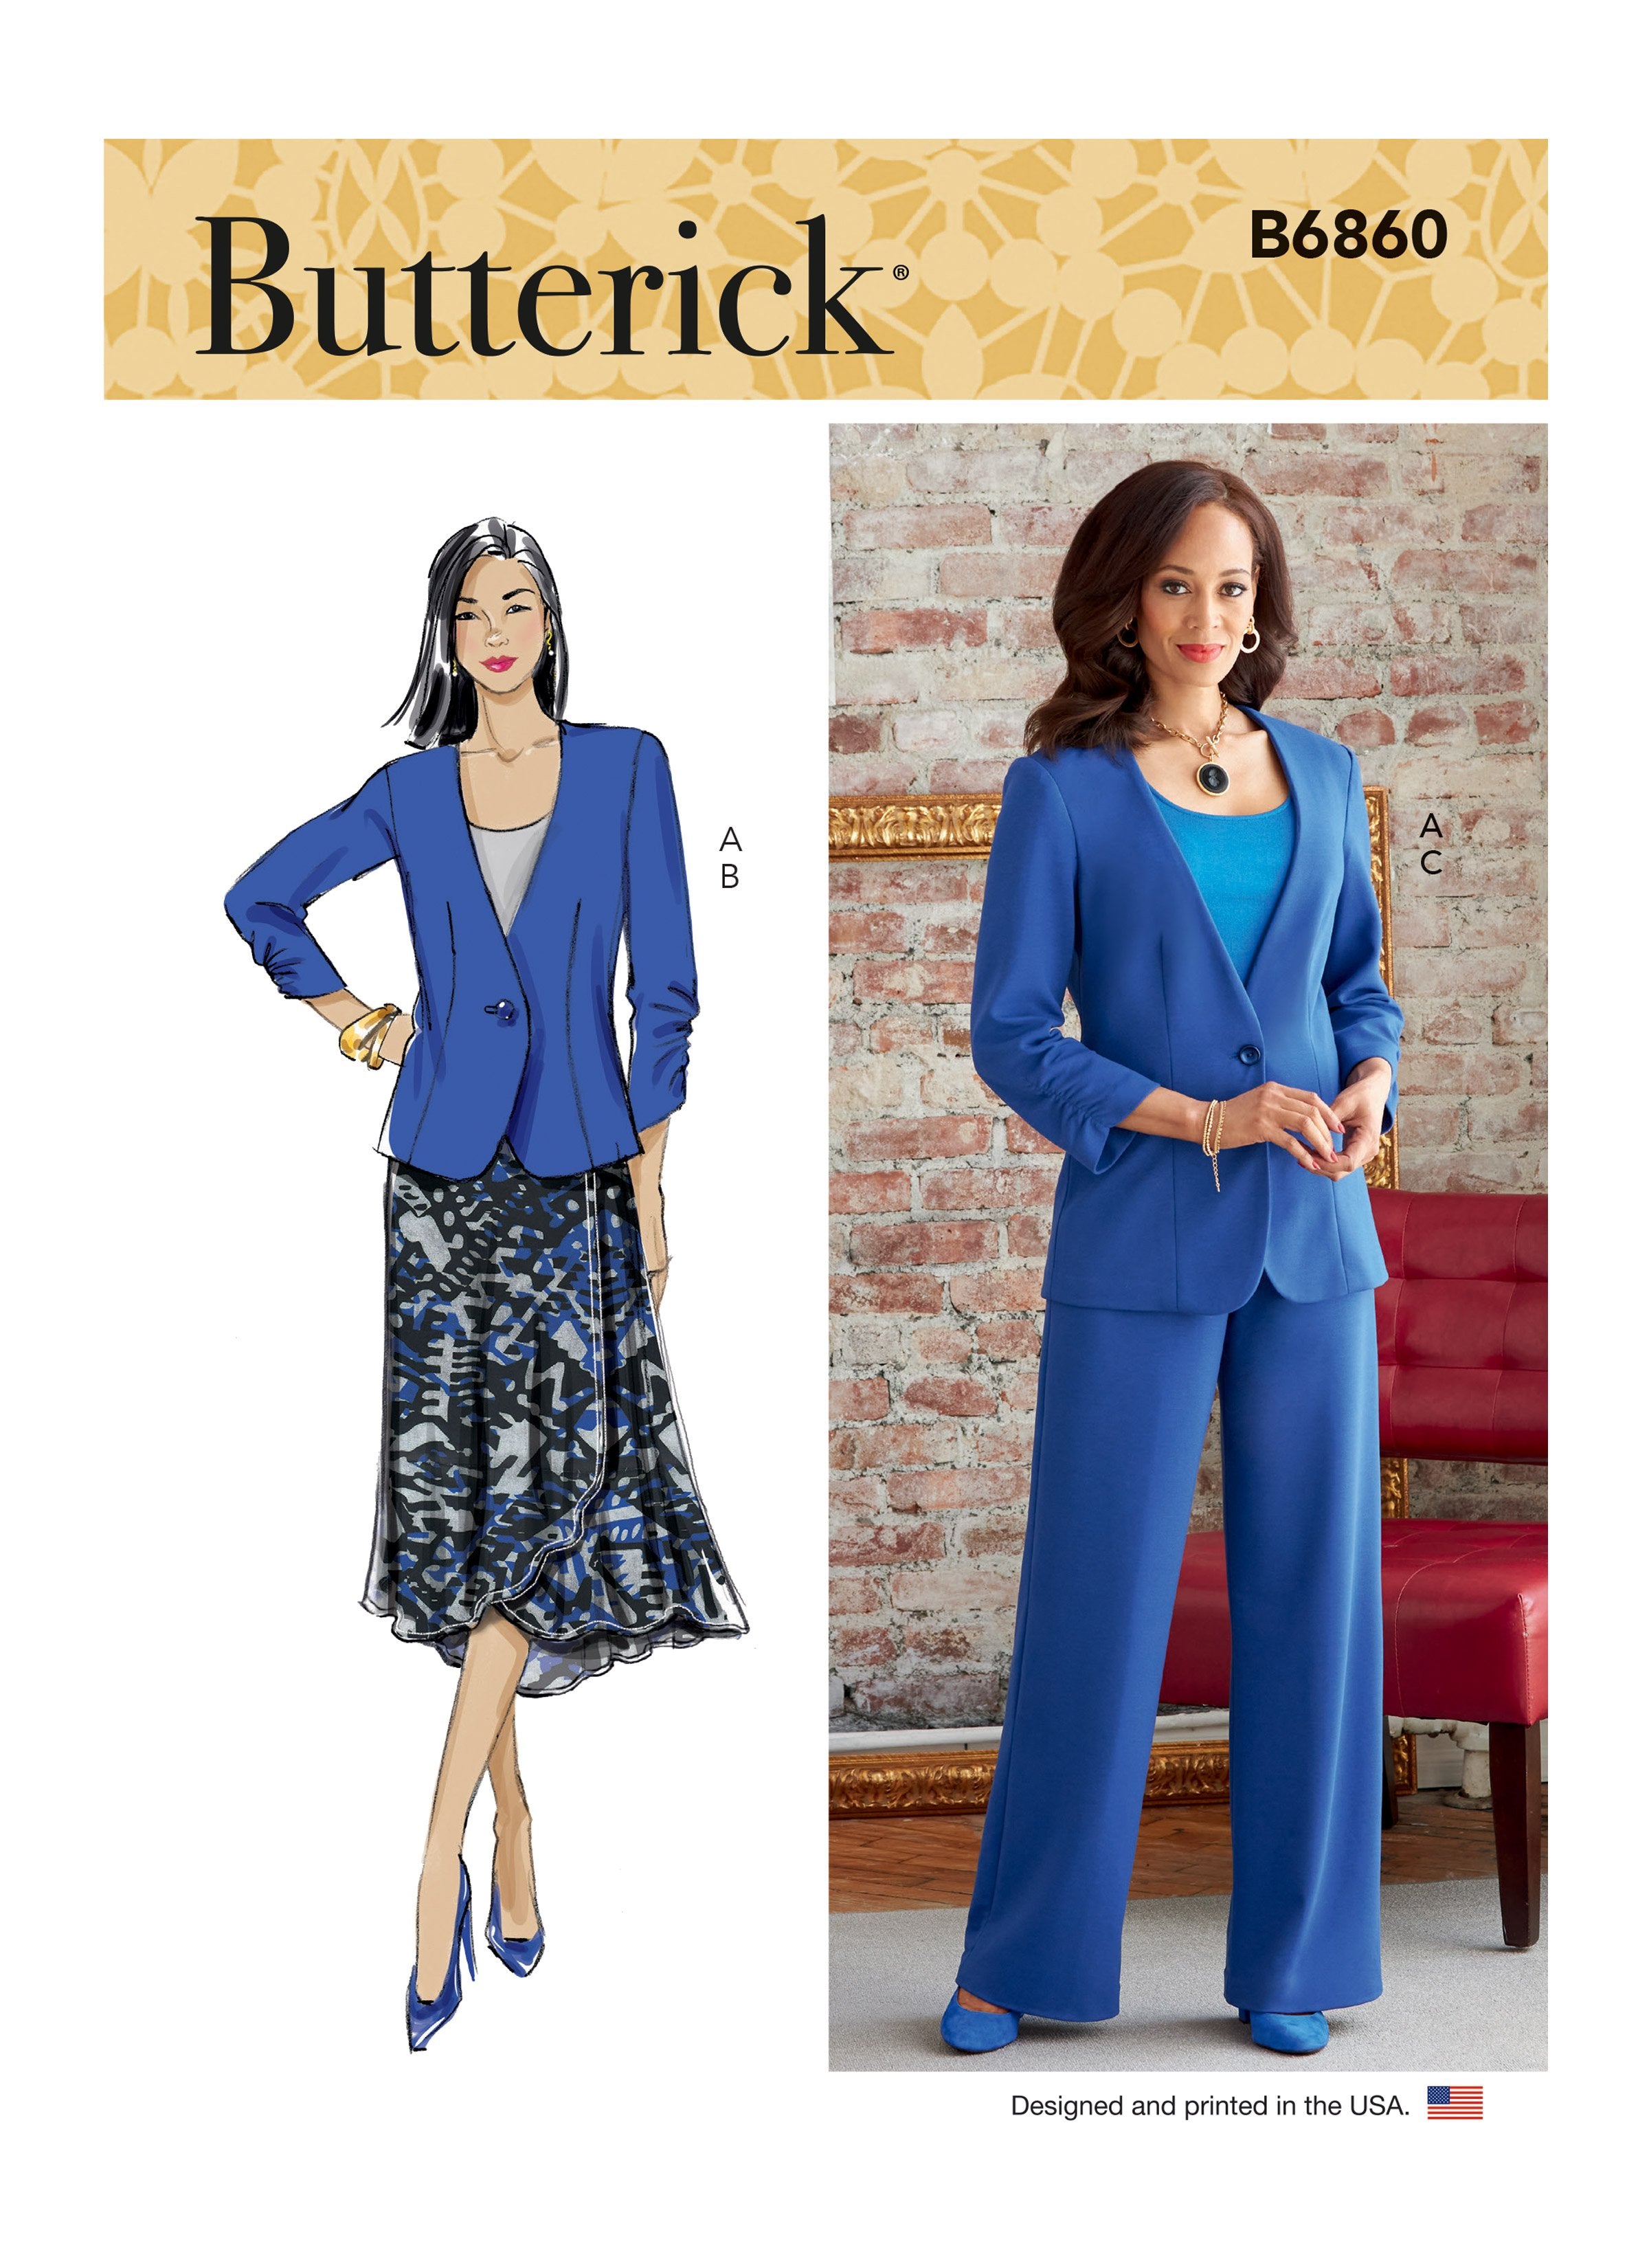 Butterick sewing pattern 6860 Misses' and Women's Jacket, Skirt and Pants from Jaycotts Sewing Supplies